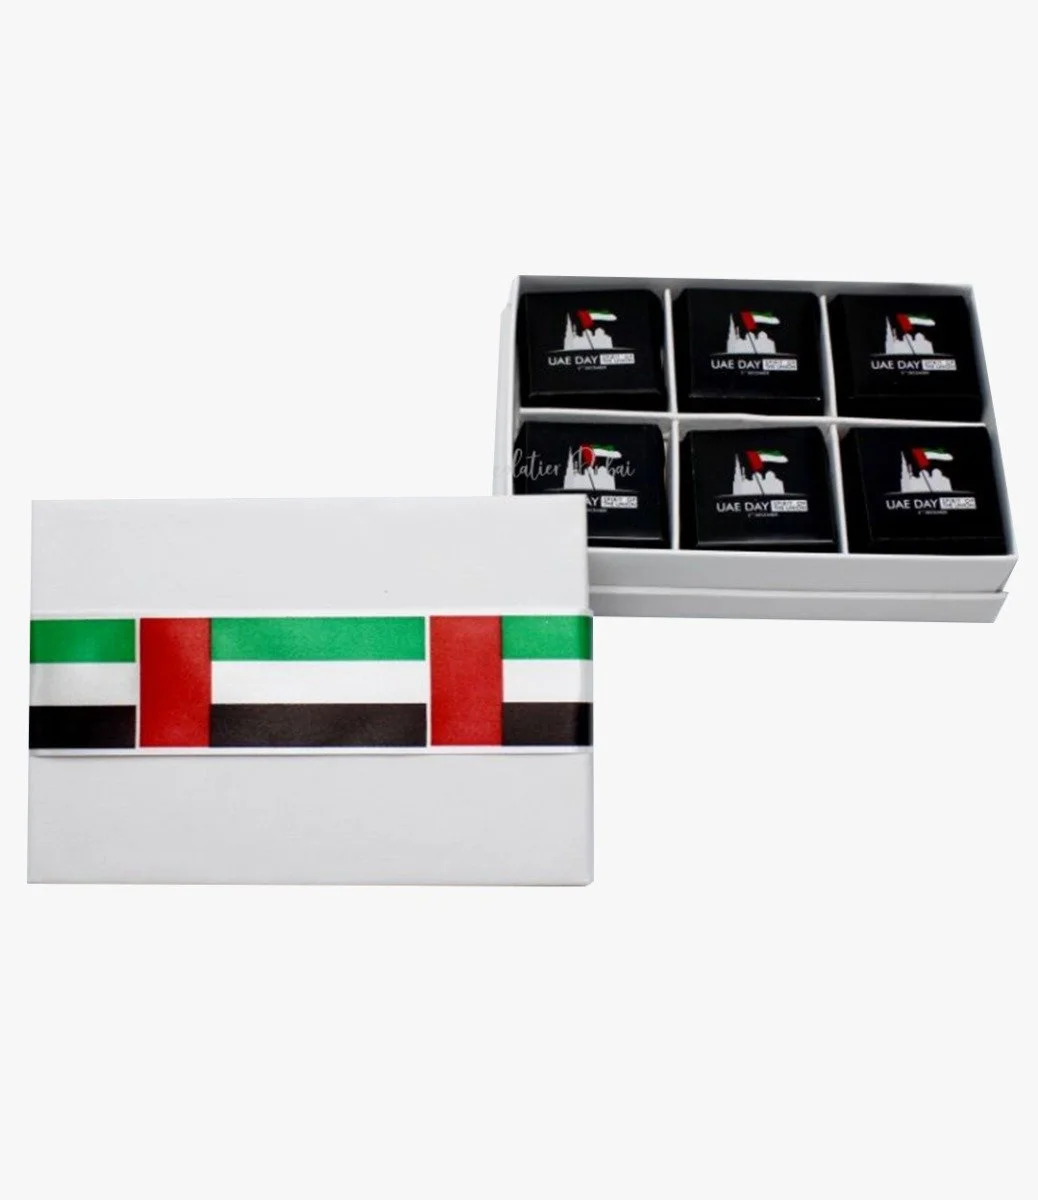 UAE Flag Wrap - National Day Gift Box 120g- Pack of 10 Boxes By Le Chocolatier